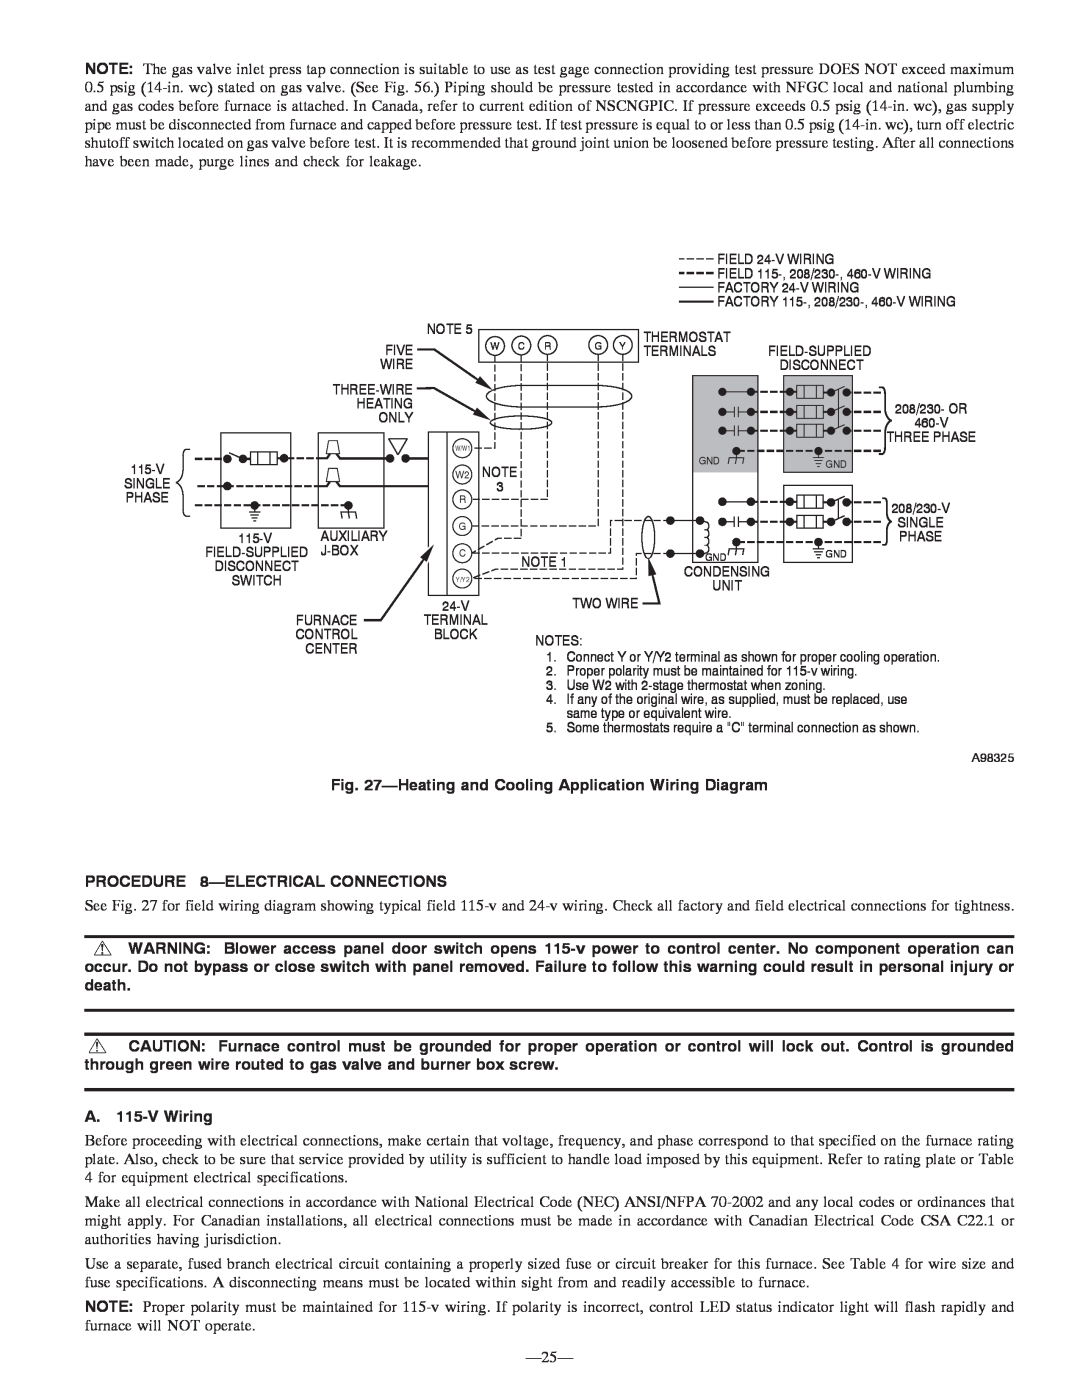 Bryant 355MAV instruction manual PROCEDURE 8-ELECTRICALCONNECTIONS, A. 115-VWiring 